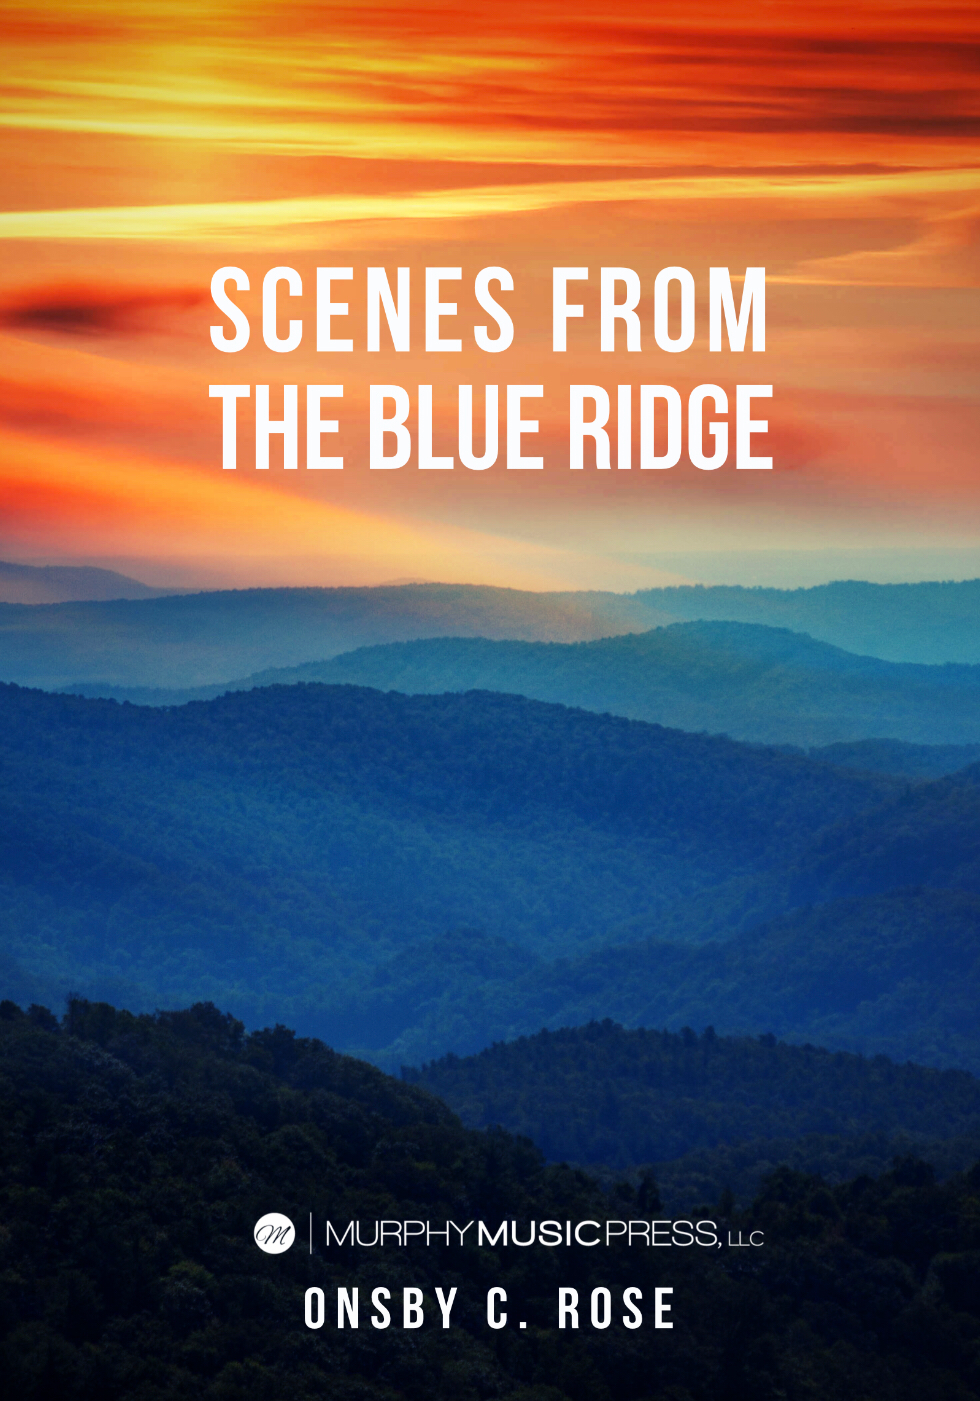 Scenes From The Blue Ridge by Onsby C. Rose